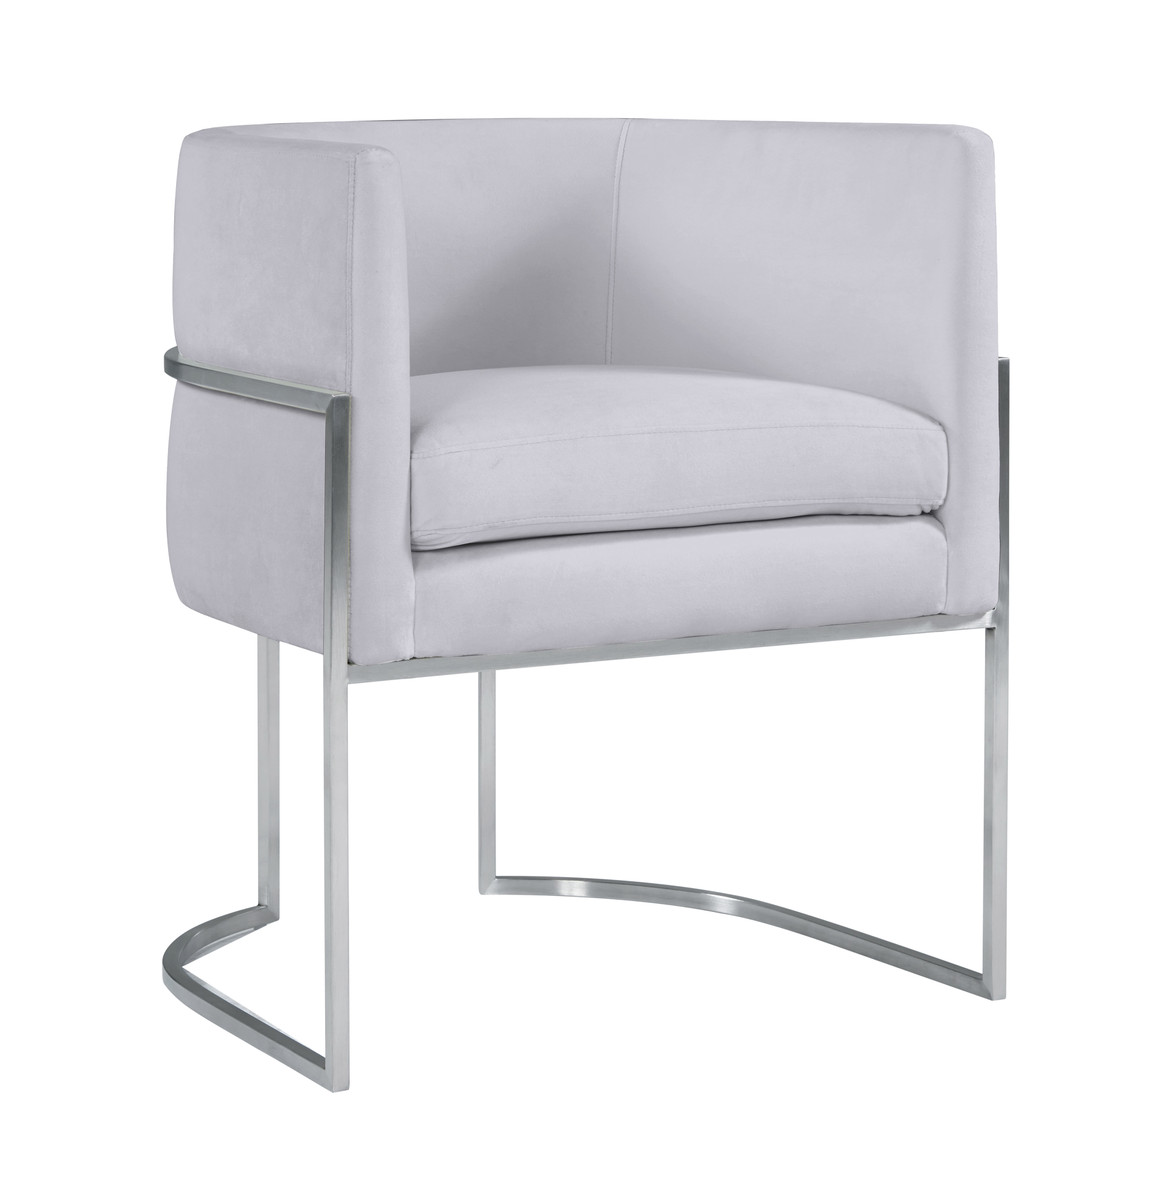 TOV-D6300 Giselle Grey Velvet Dining Chair with Silver Leg - 28 x 24.4 x 23.2 in -  Tov Furniture